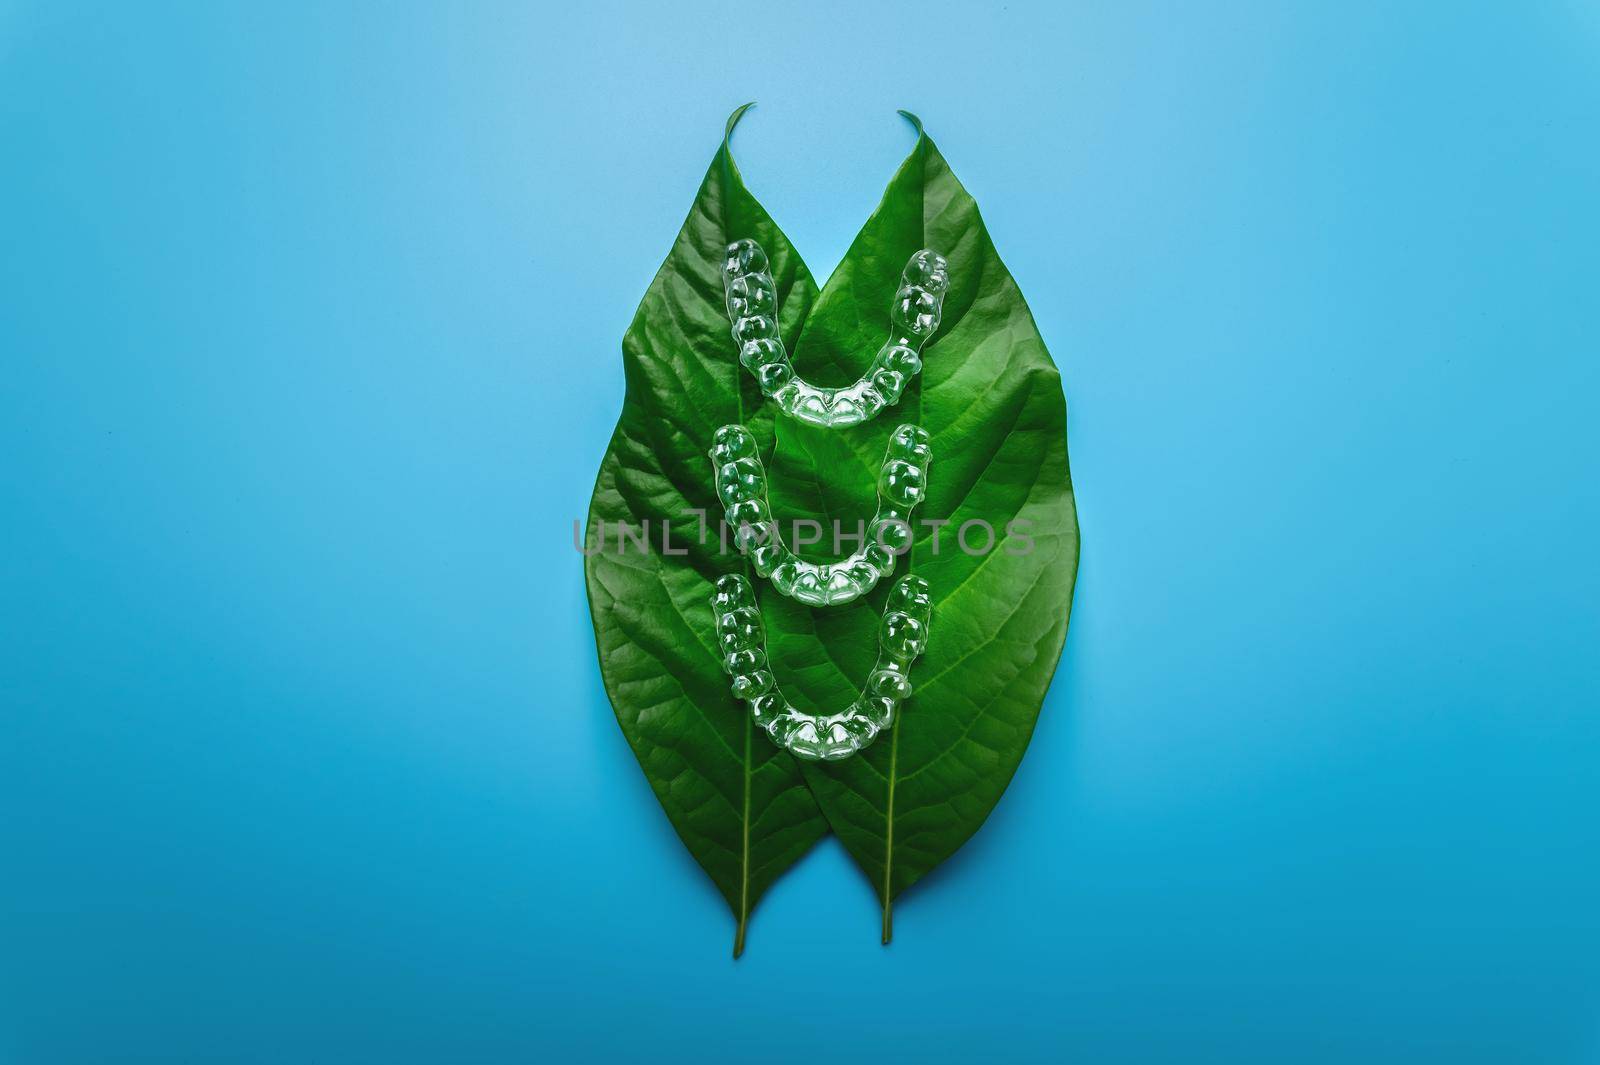 Invisible plastic braces three pieces lie on a green succulent leaf from a flower on a blue background, studio shot.